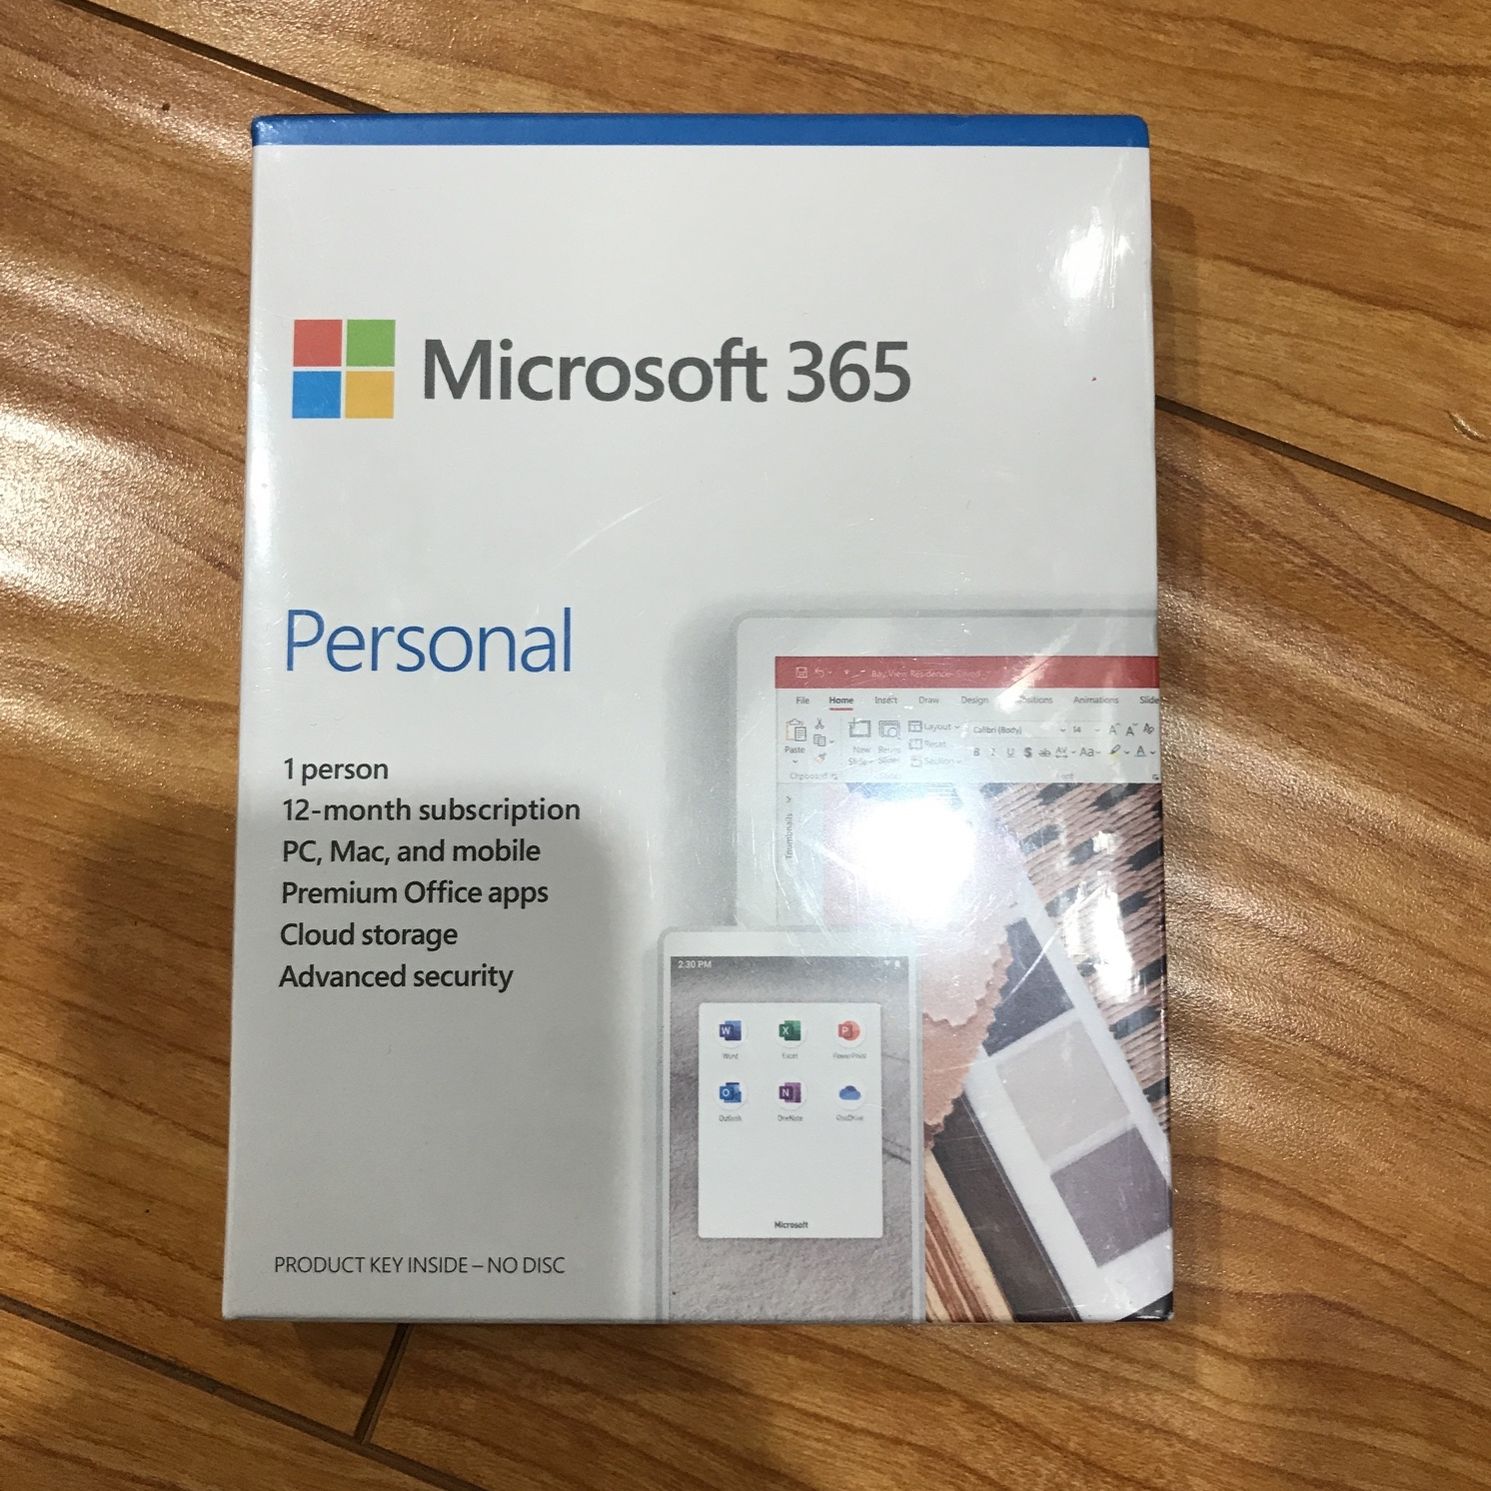 Microsoft 365 Personal (2020 New) + Wifi Range Extender Available